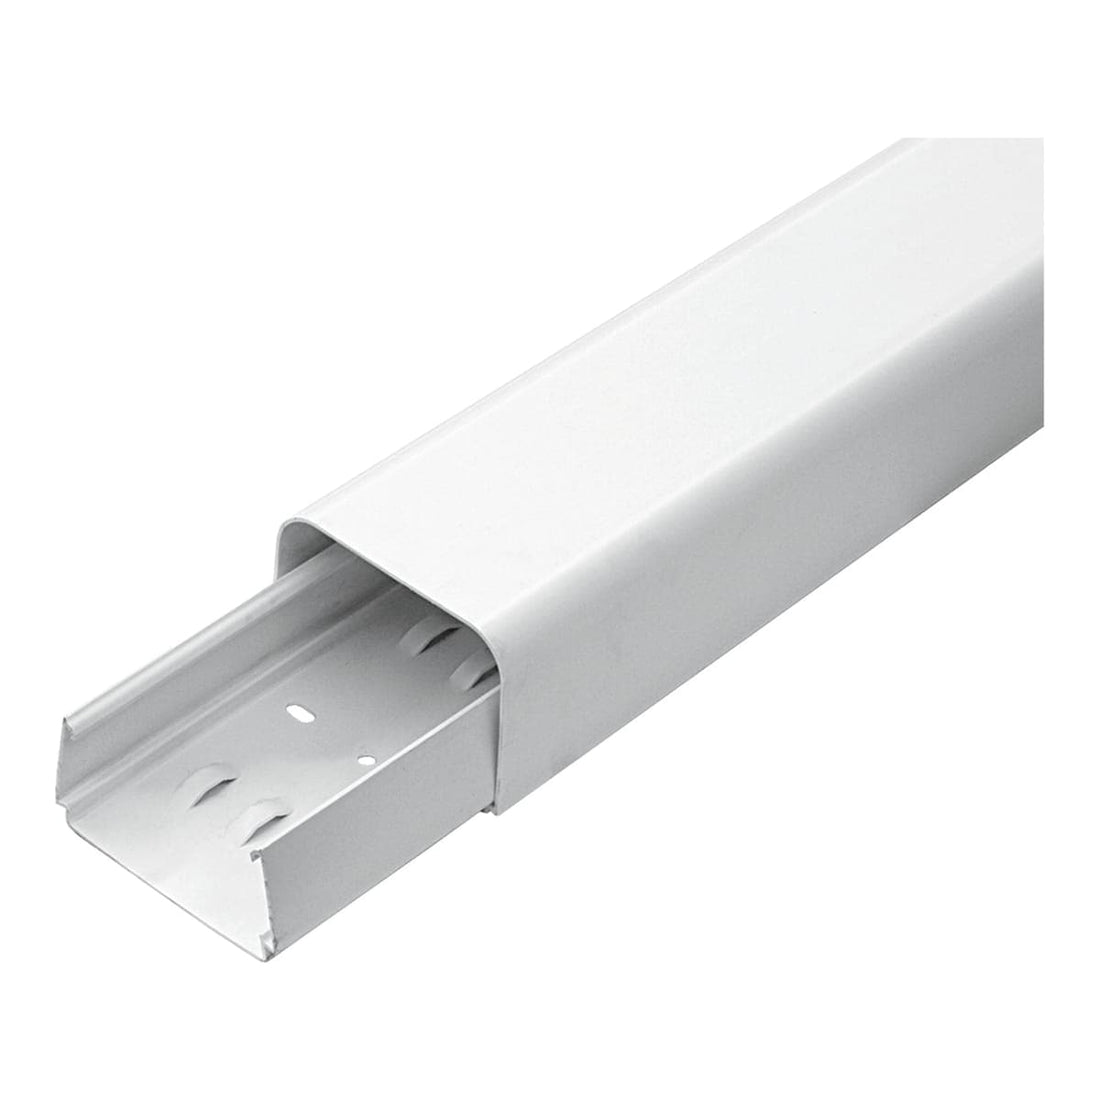 U-SHAPED CLIMATE DUCT 80X60 MM WHITE - best price from Maltashopper.com BR420004270